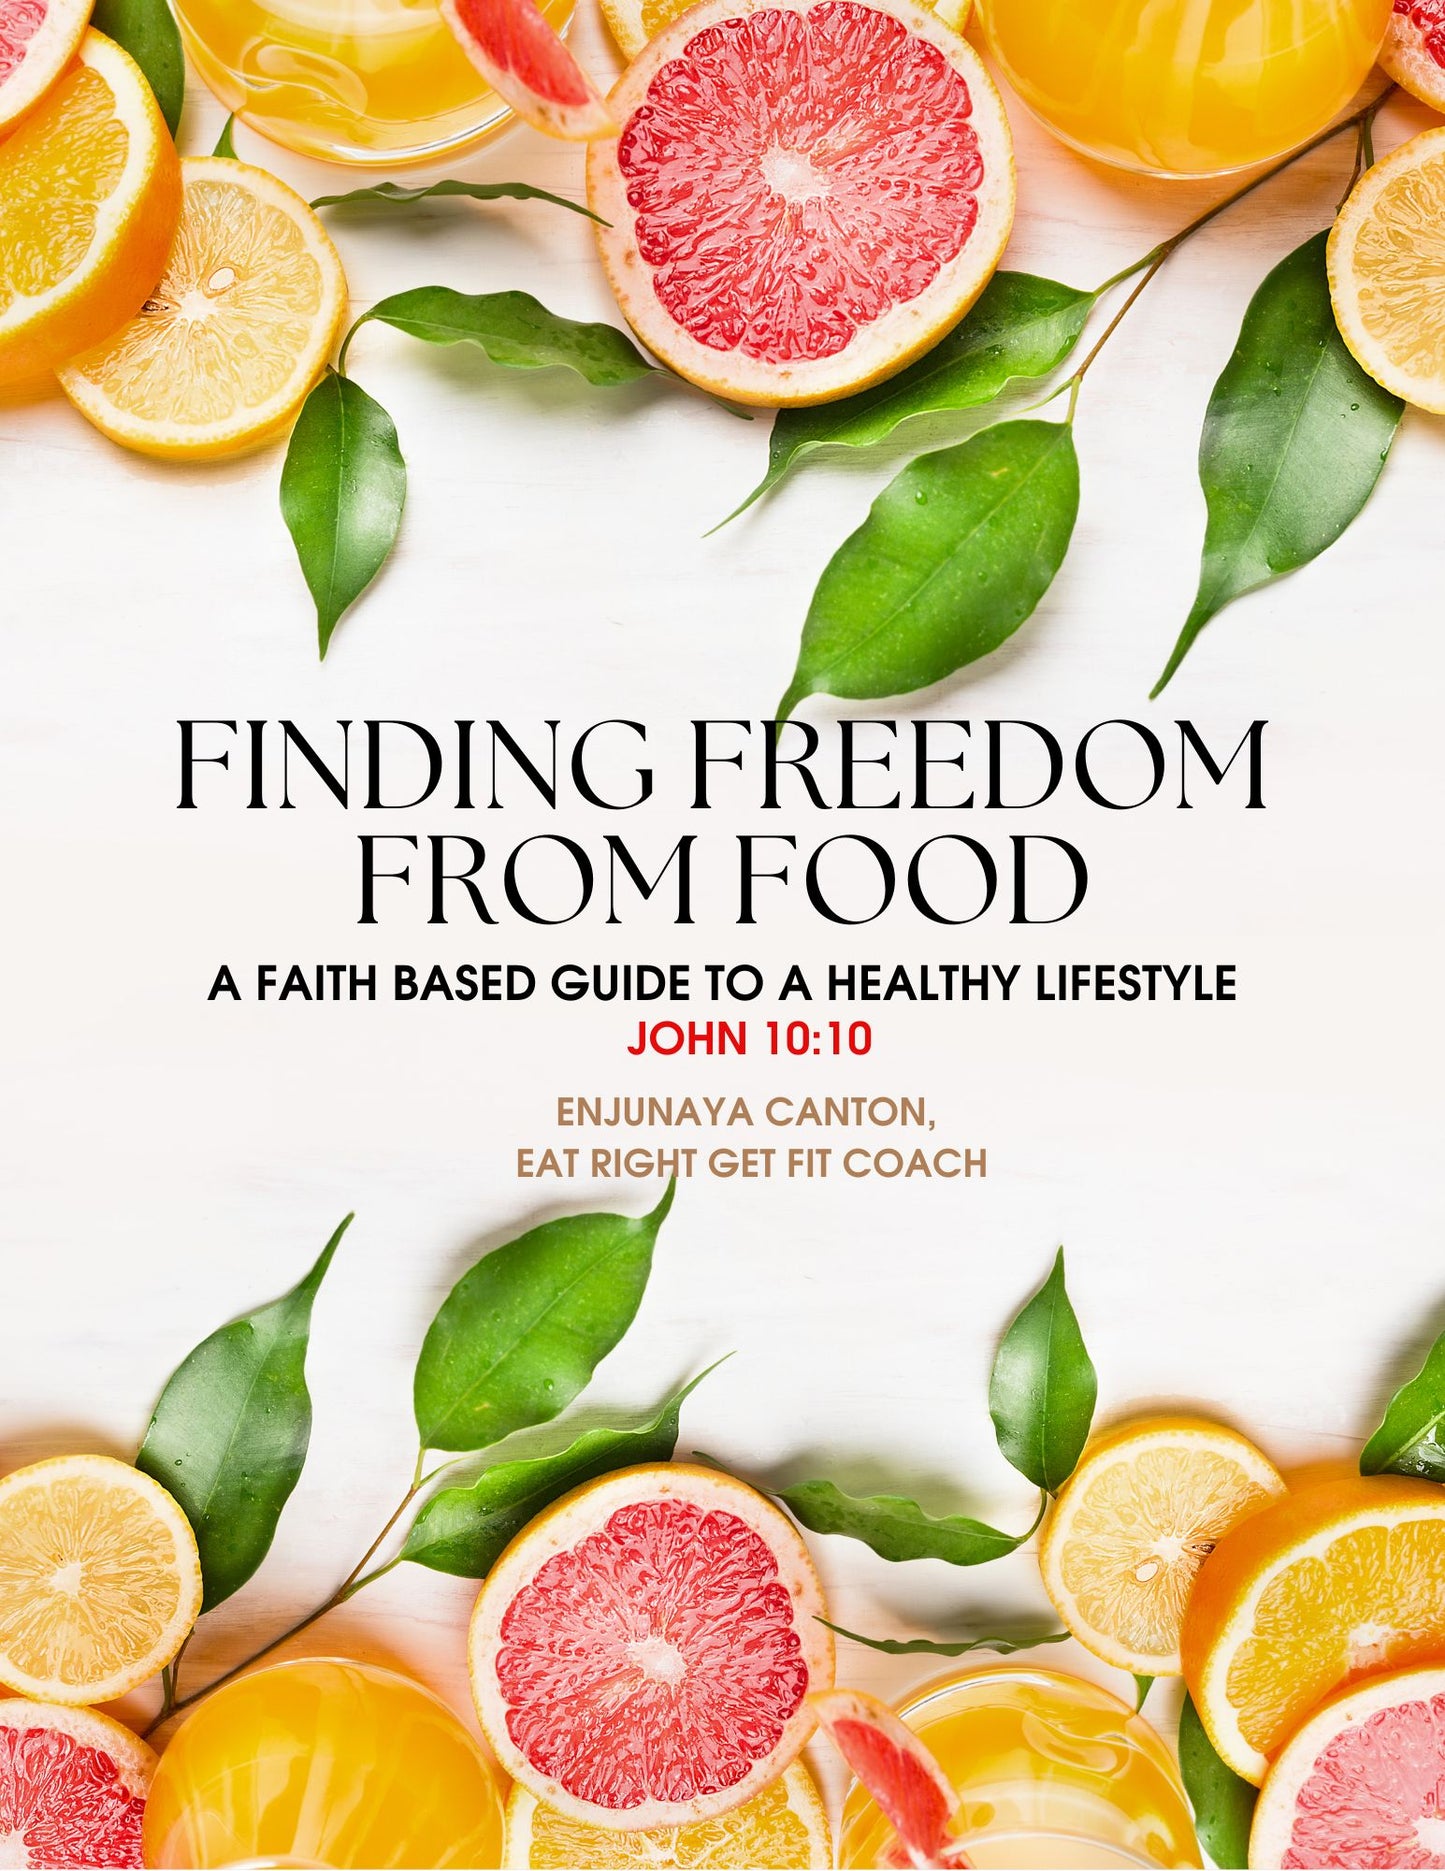 Finding Freedom From Food: A Faith Based Guide To A Healthy Lifestyle